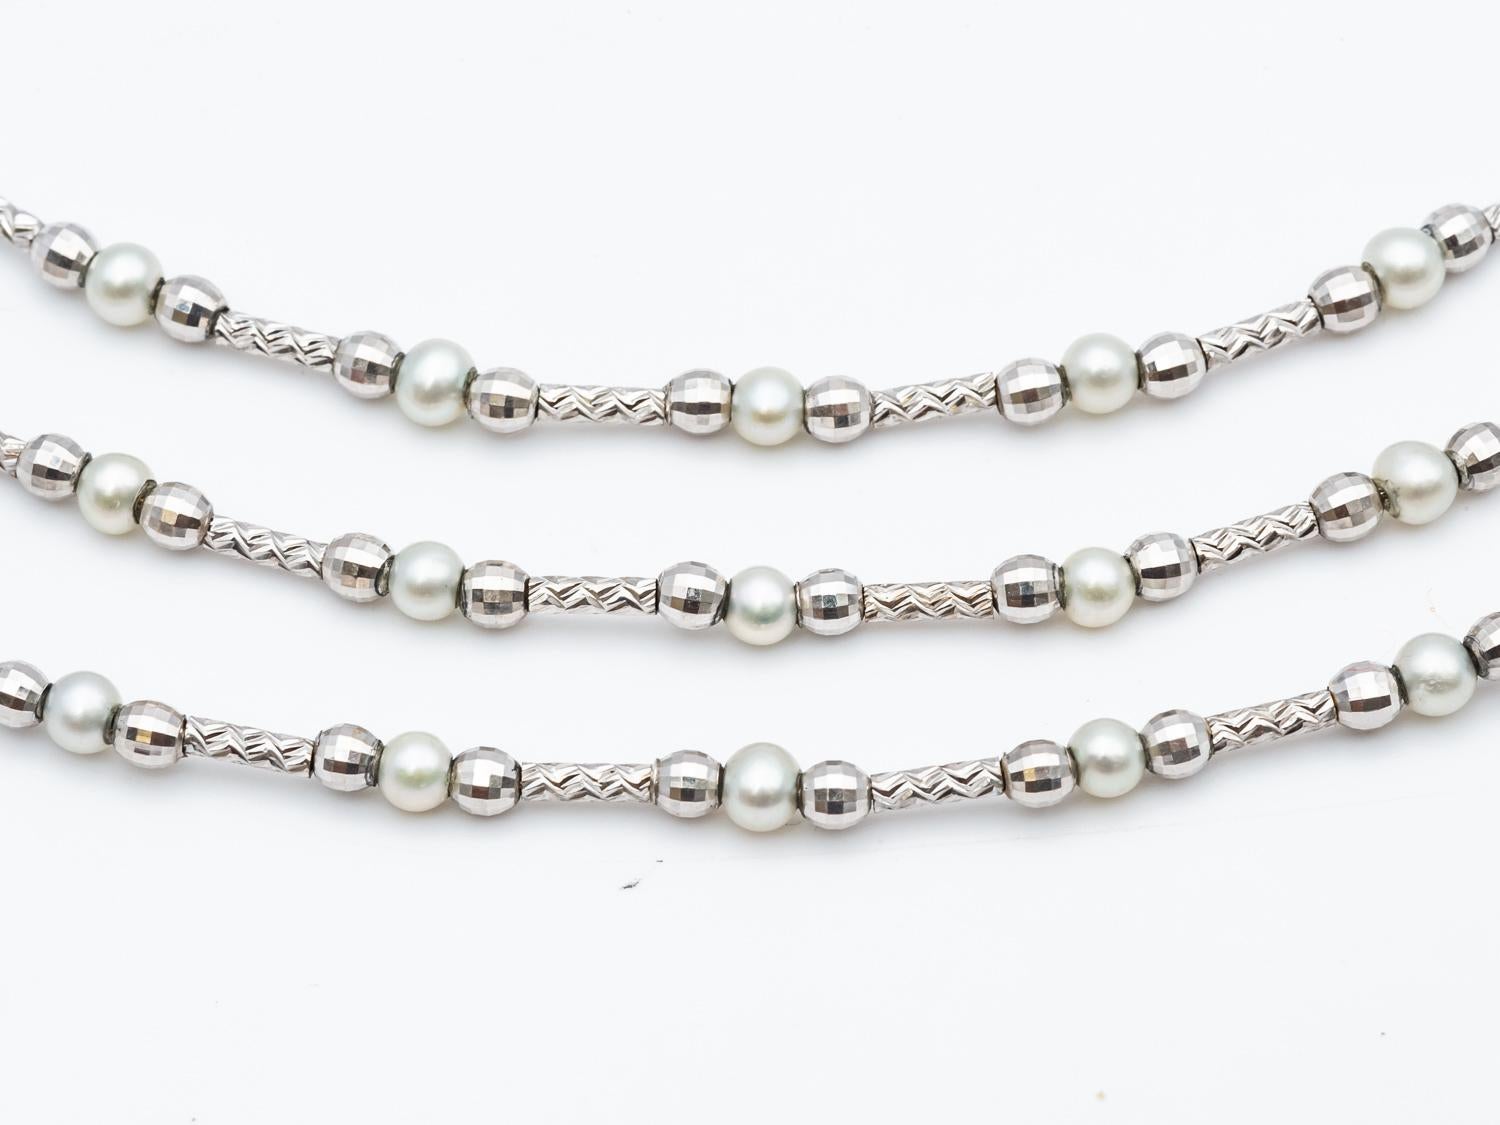 Magnificent 3-row necklace in 18-carat white gold with fine pearls, an exceptional piece of jewelry that perfectly embodies elegance and sophistication. Designed according to 1st Dibs benchmark criteria, this necklace will captivate all eyes with